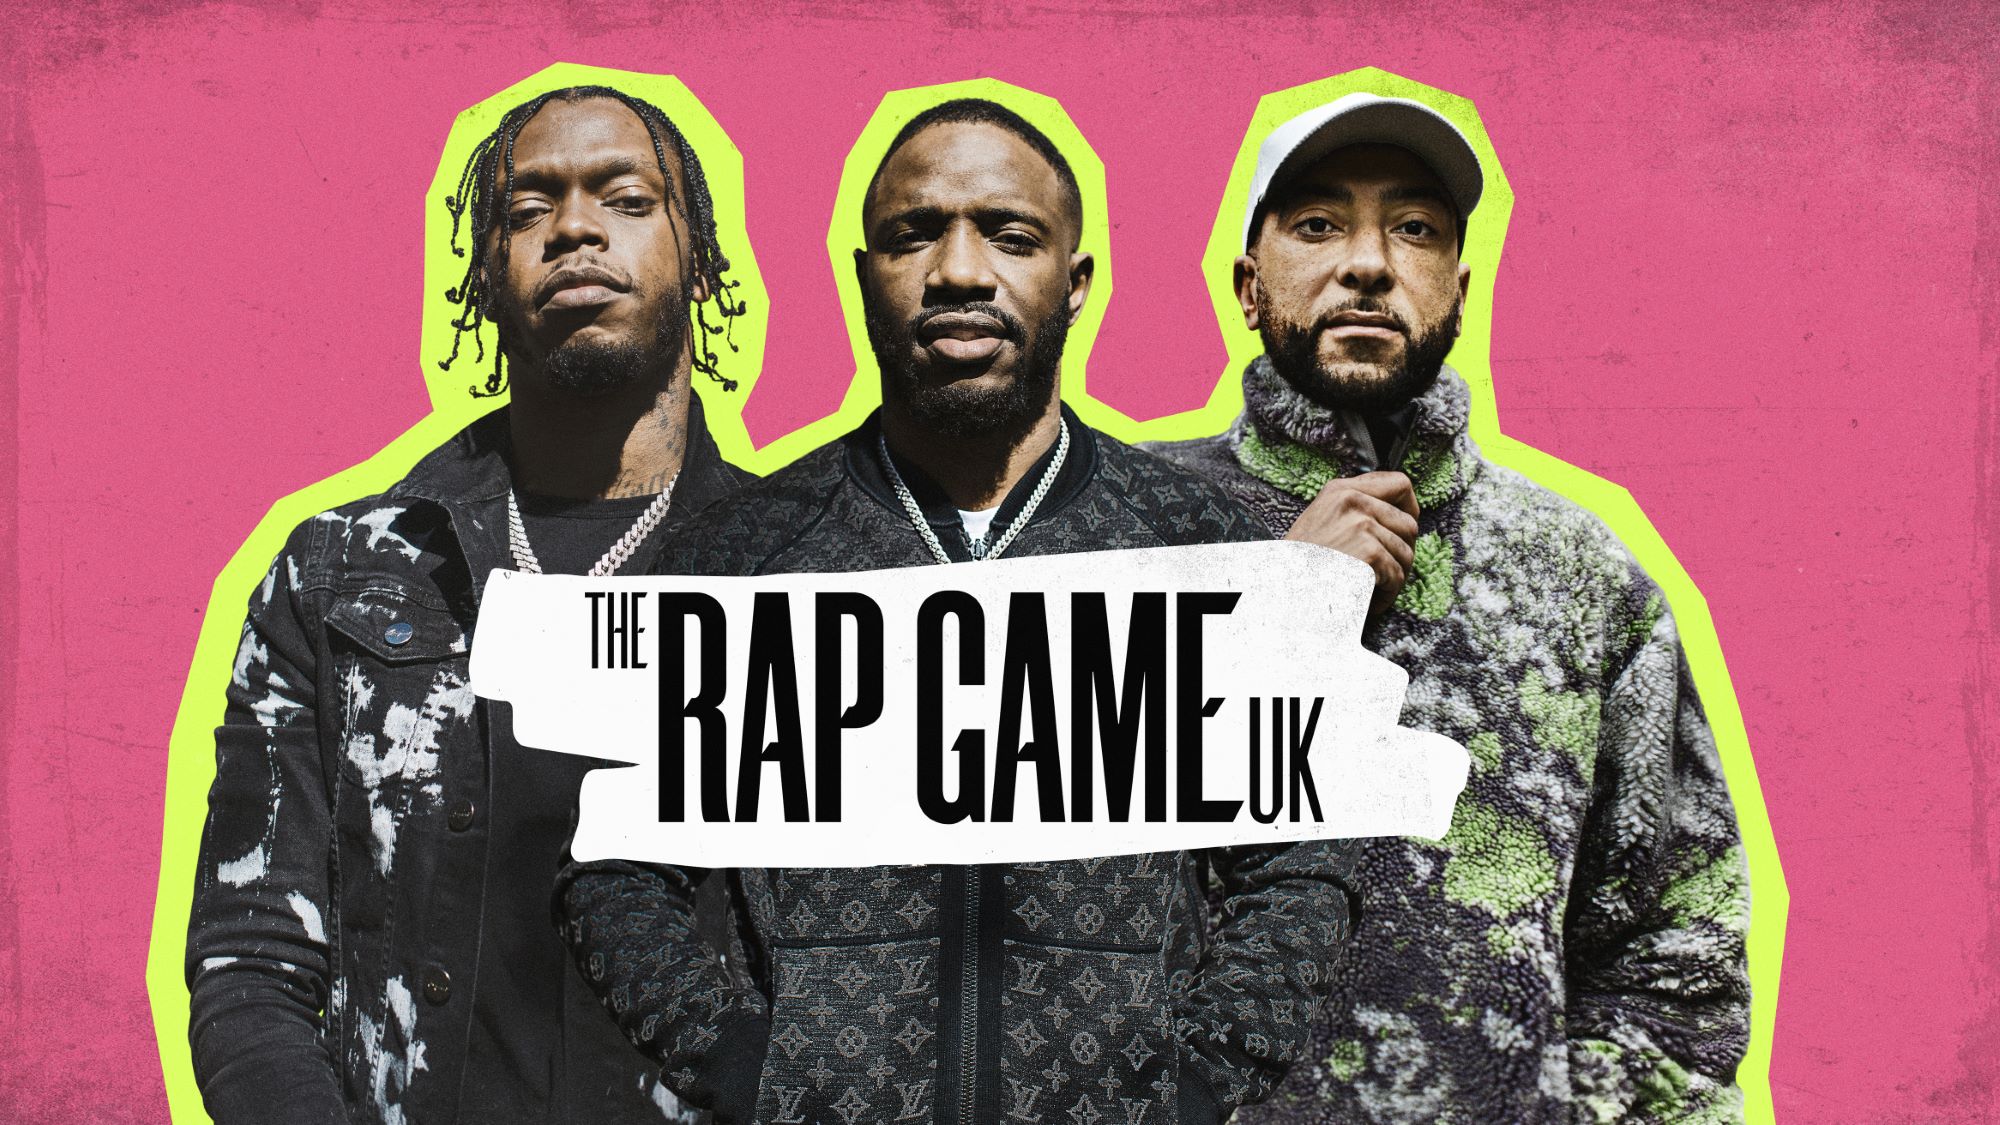 The Rap Game UK 2021 crowns its winner for series 3